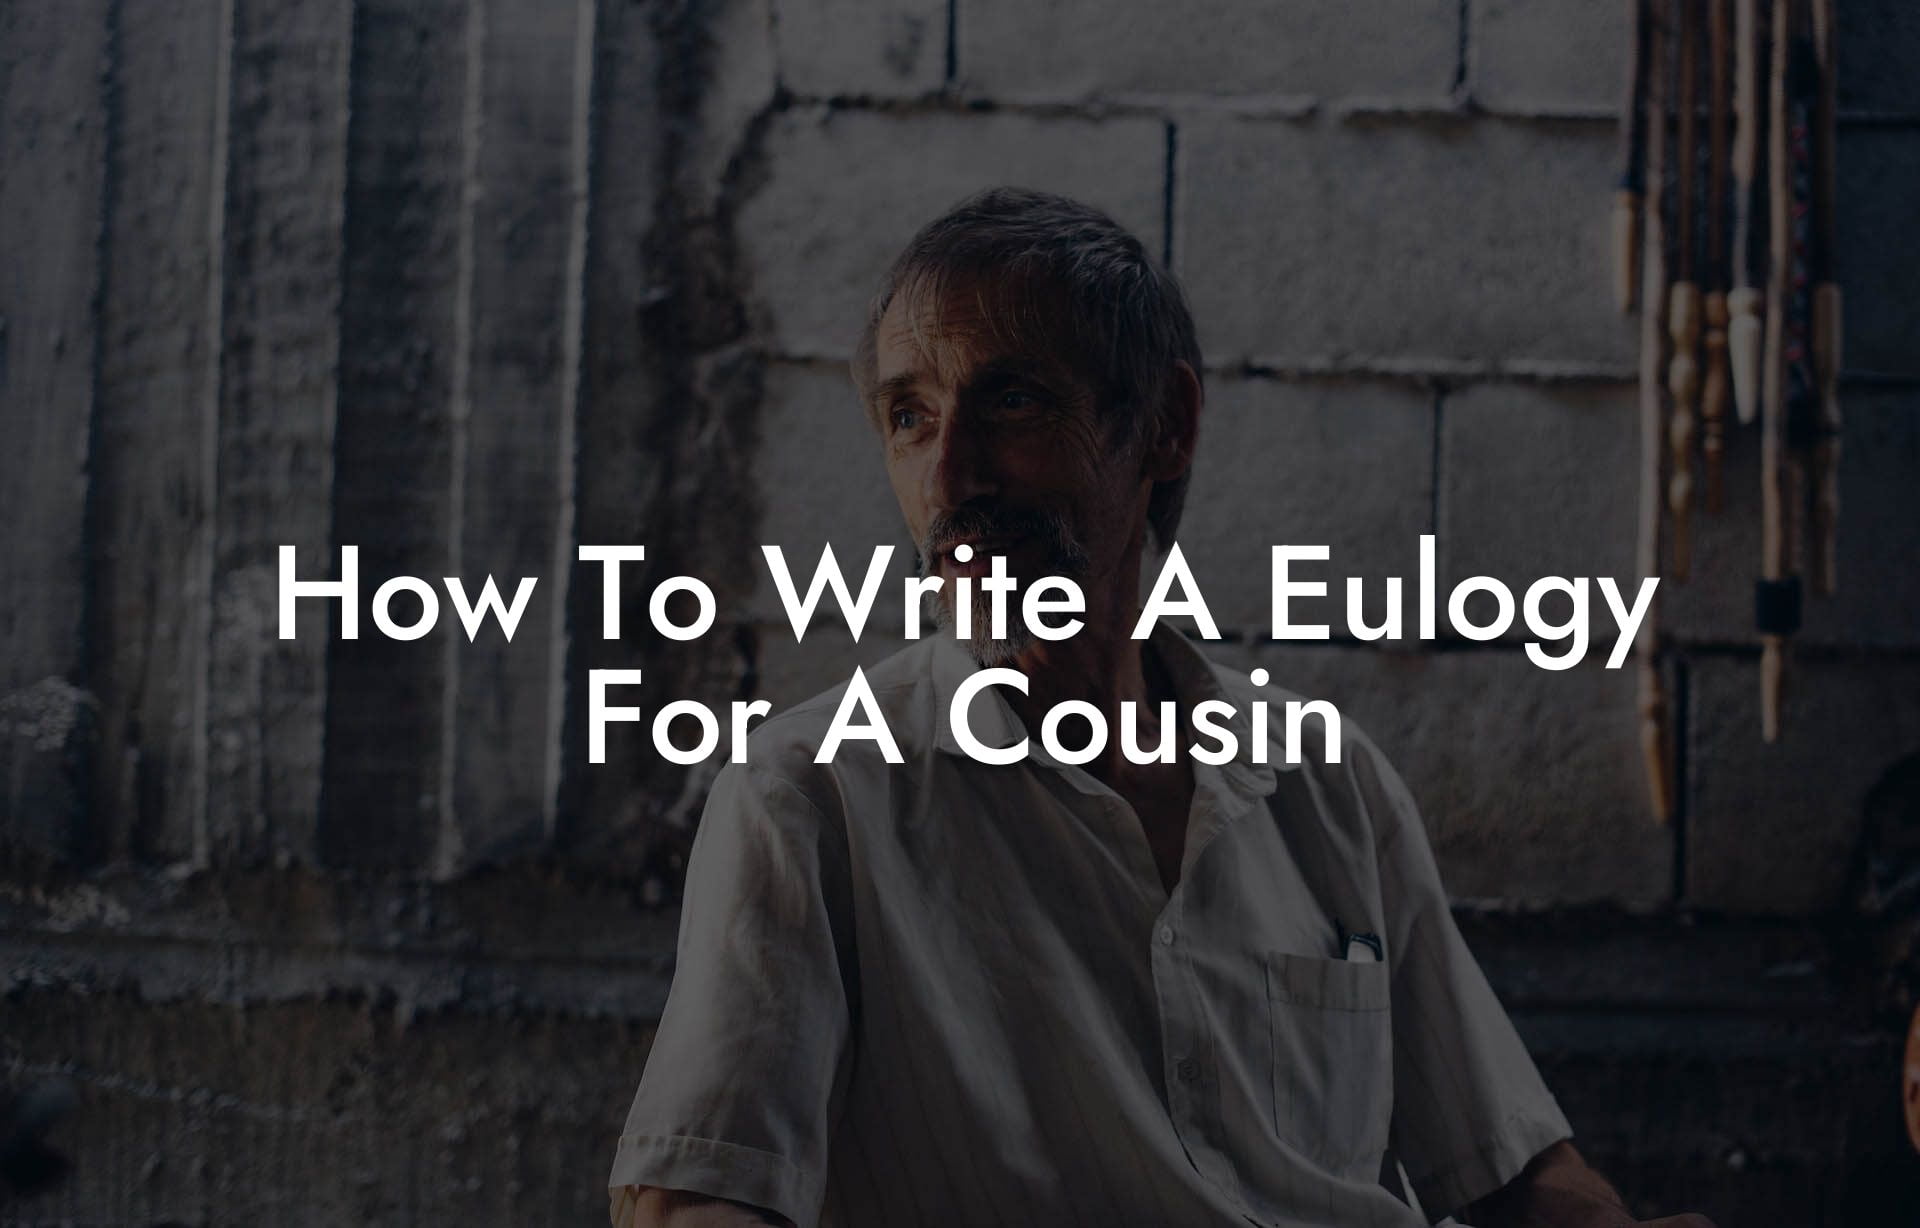 How To Write A Eulogy For A Cousin